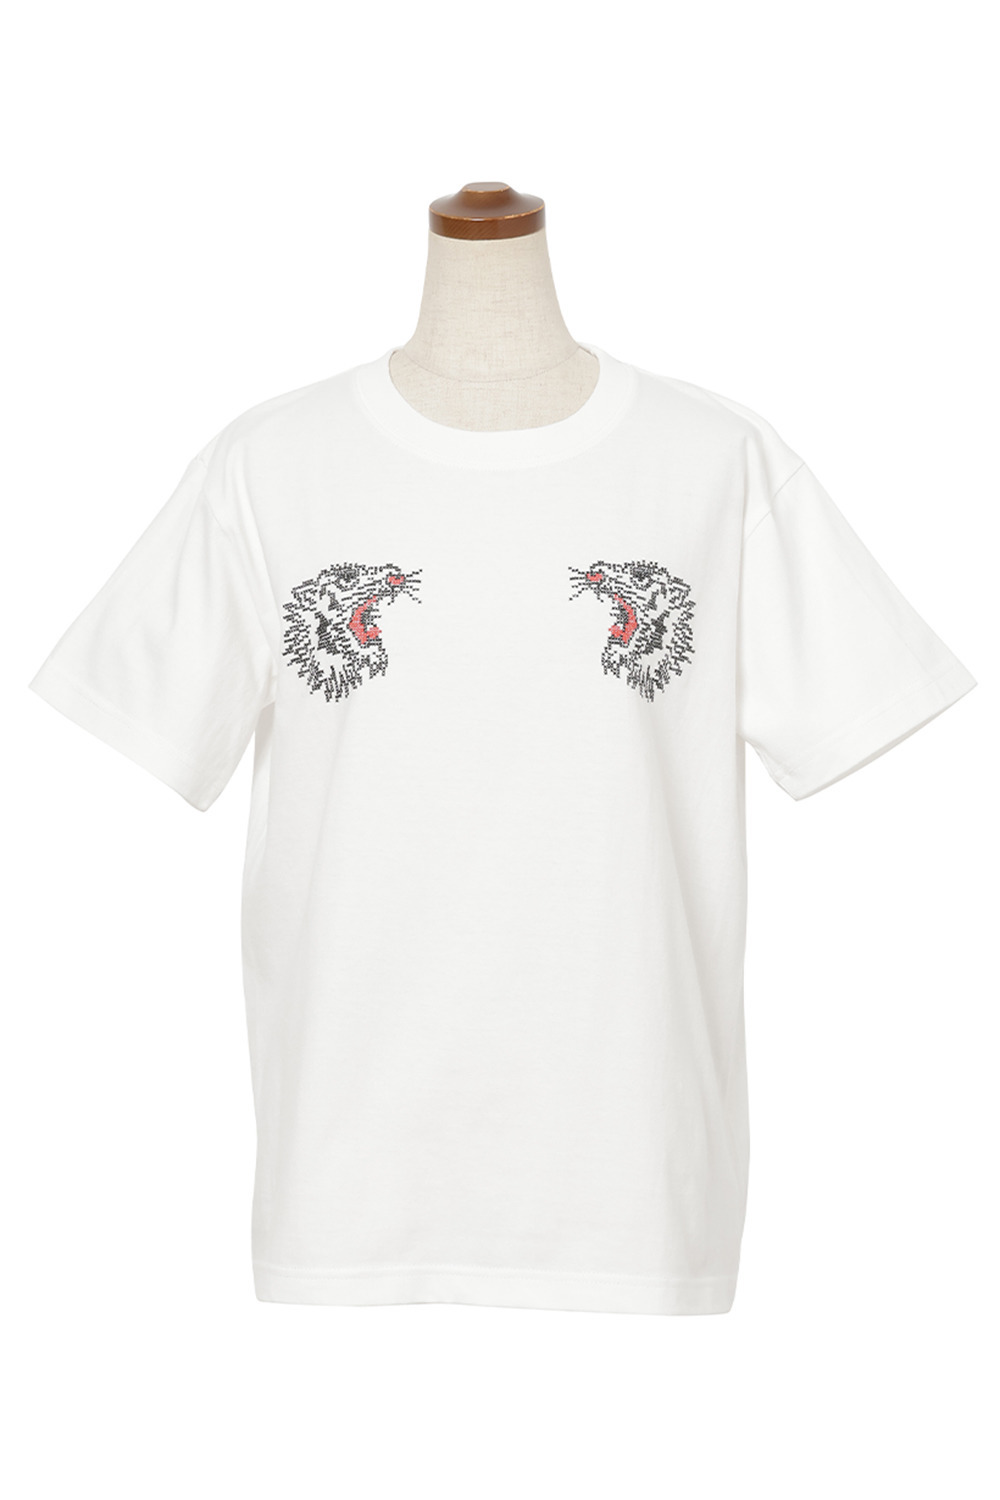 JAPAN Embroidery Style Print Tシャツ 詳細画像 ホワイト